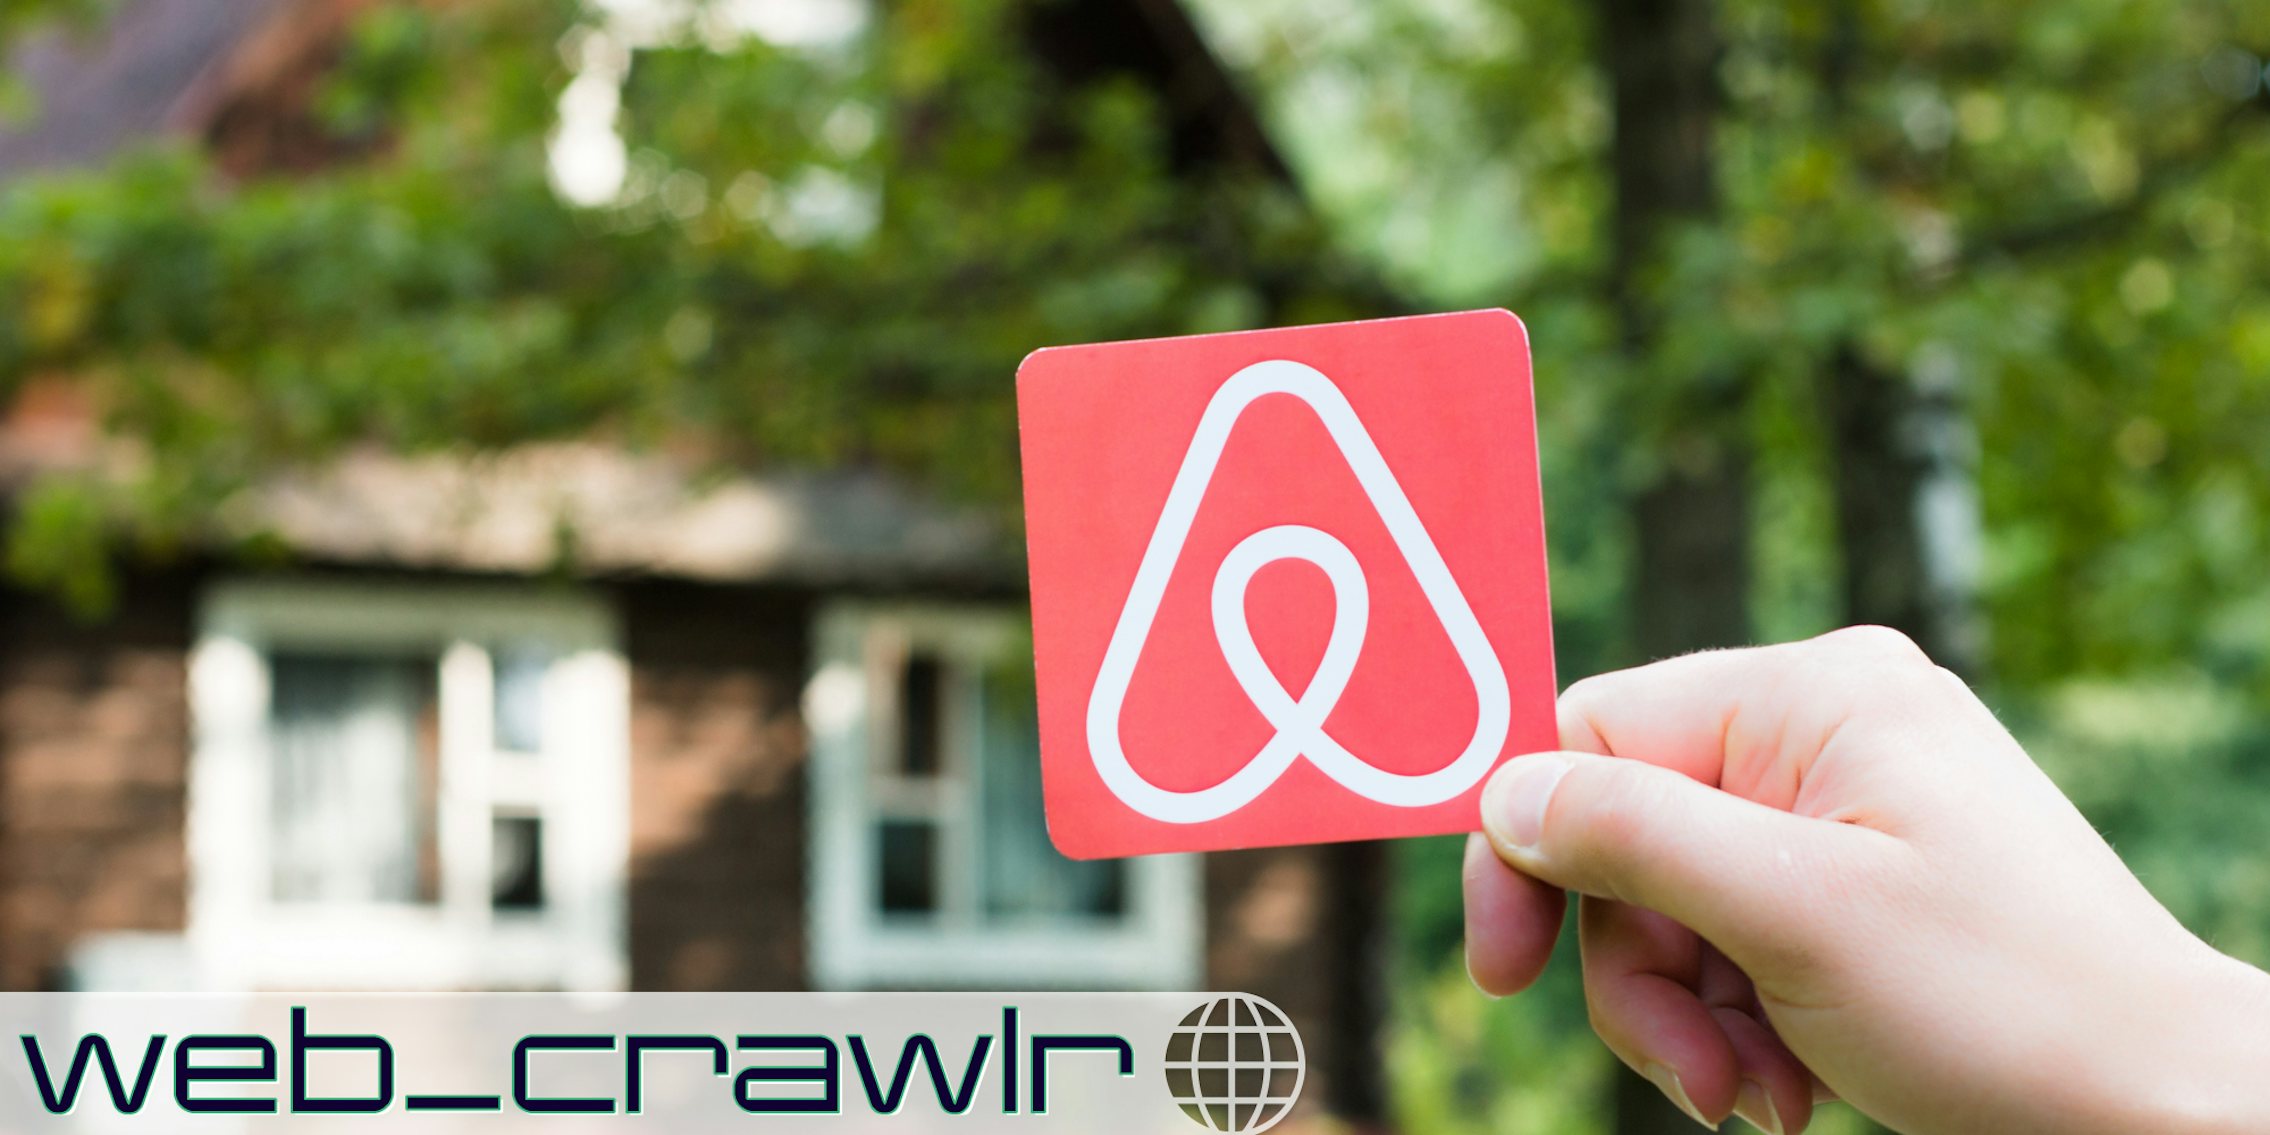 A house with an Airbnb card in front of it. The Daily Dot newsletter web_crawlr logo is in the bottom left corner.